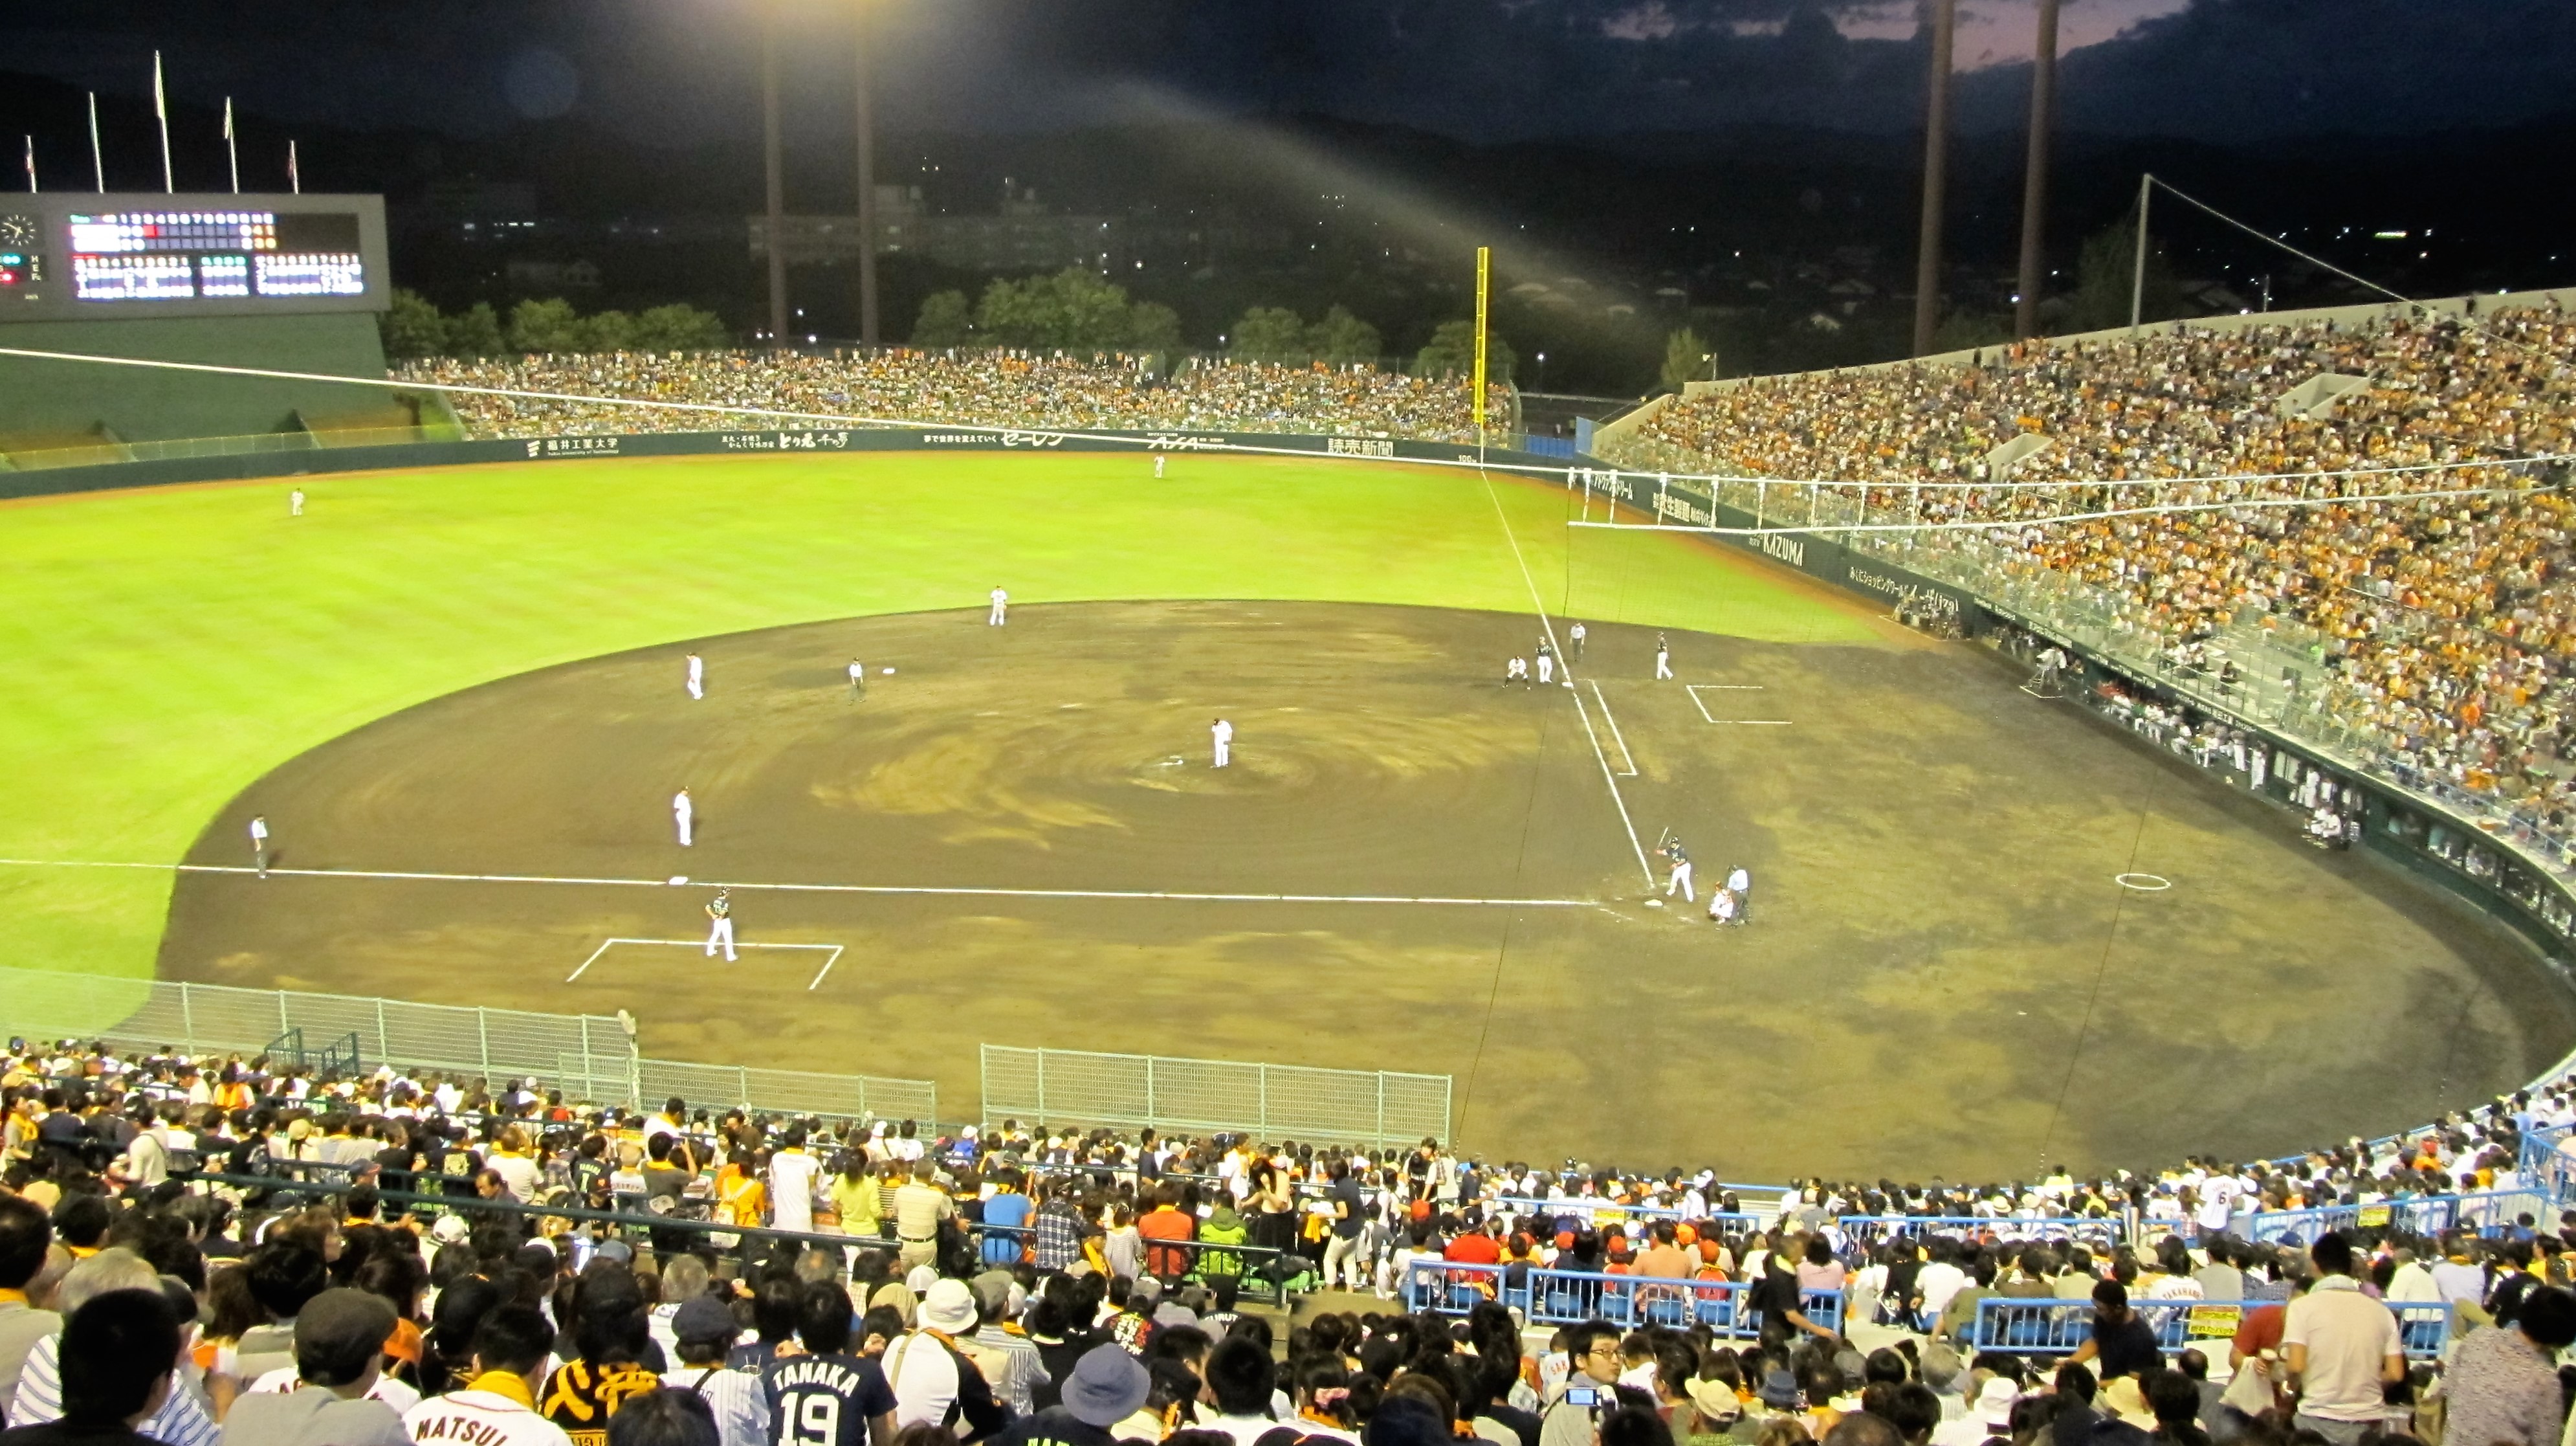 Countryside games add challenges, concerns for NPB teams